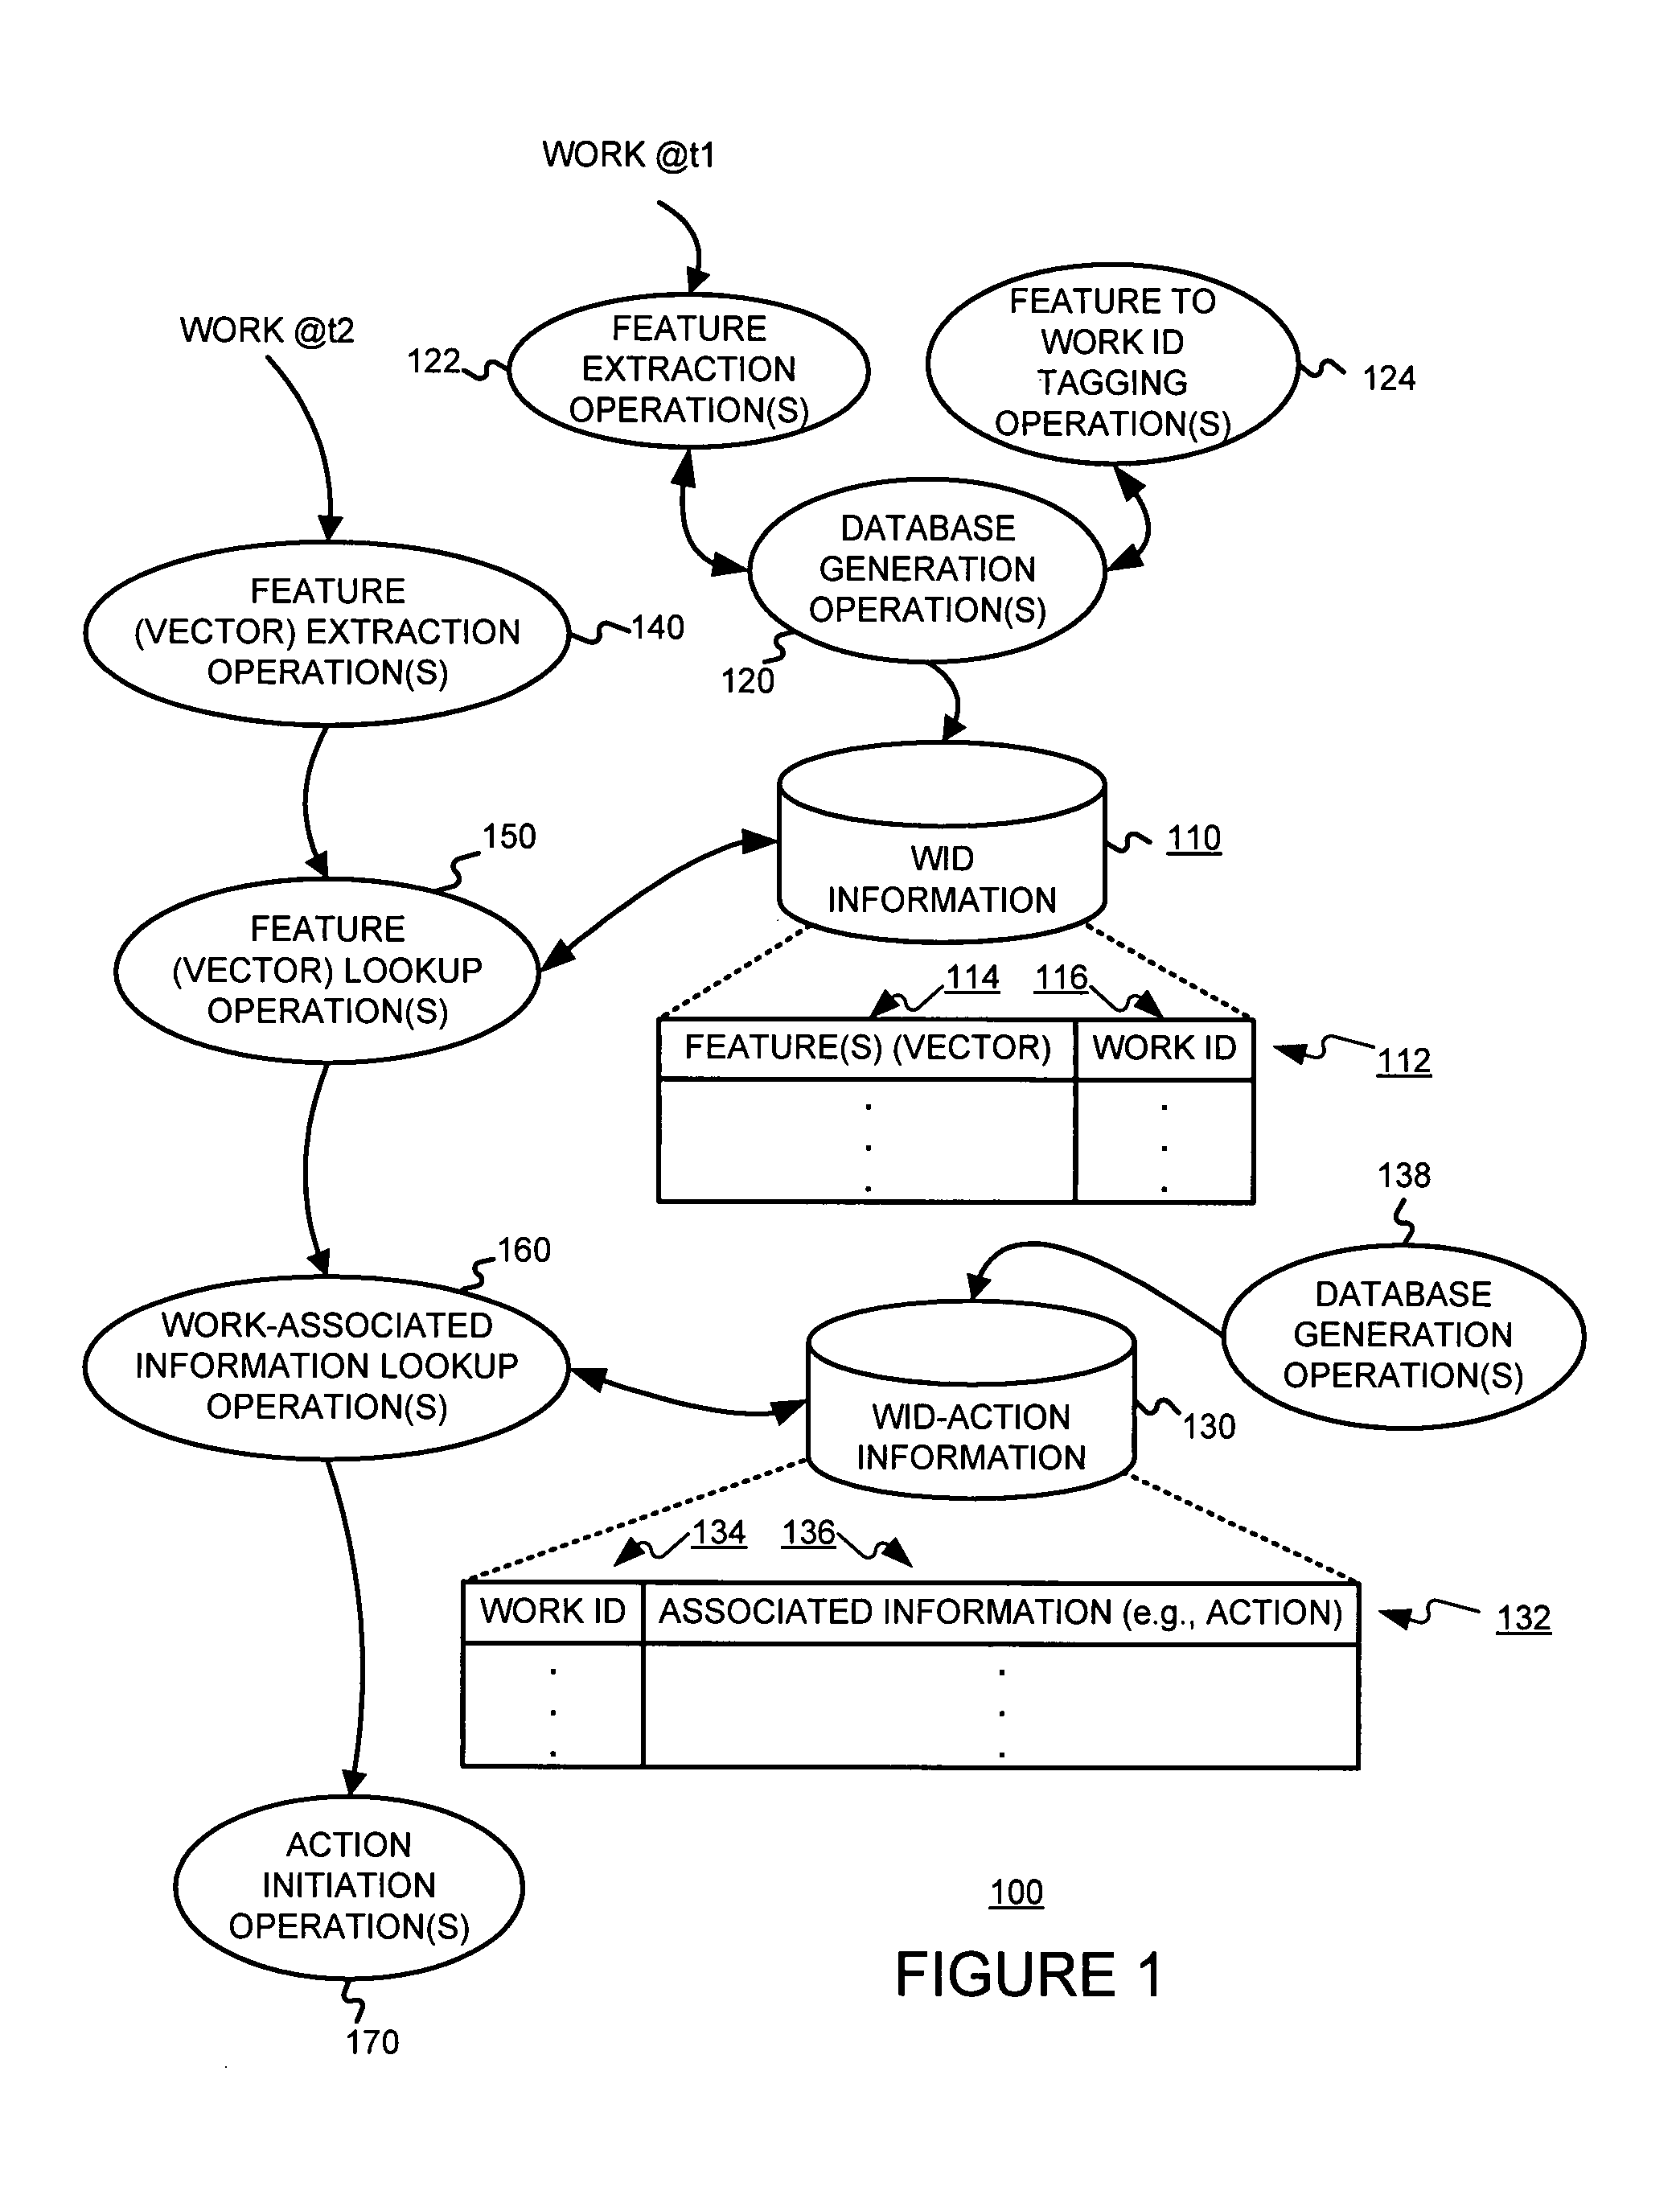 Identifying works, using a sub-linear time search, such as an approximate nearest neighbor search, for initiating a work-based action, such as an action on the internet